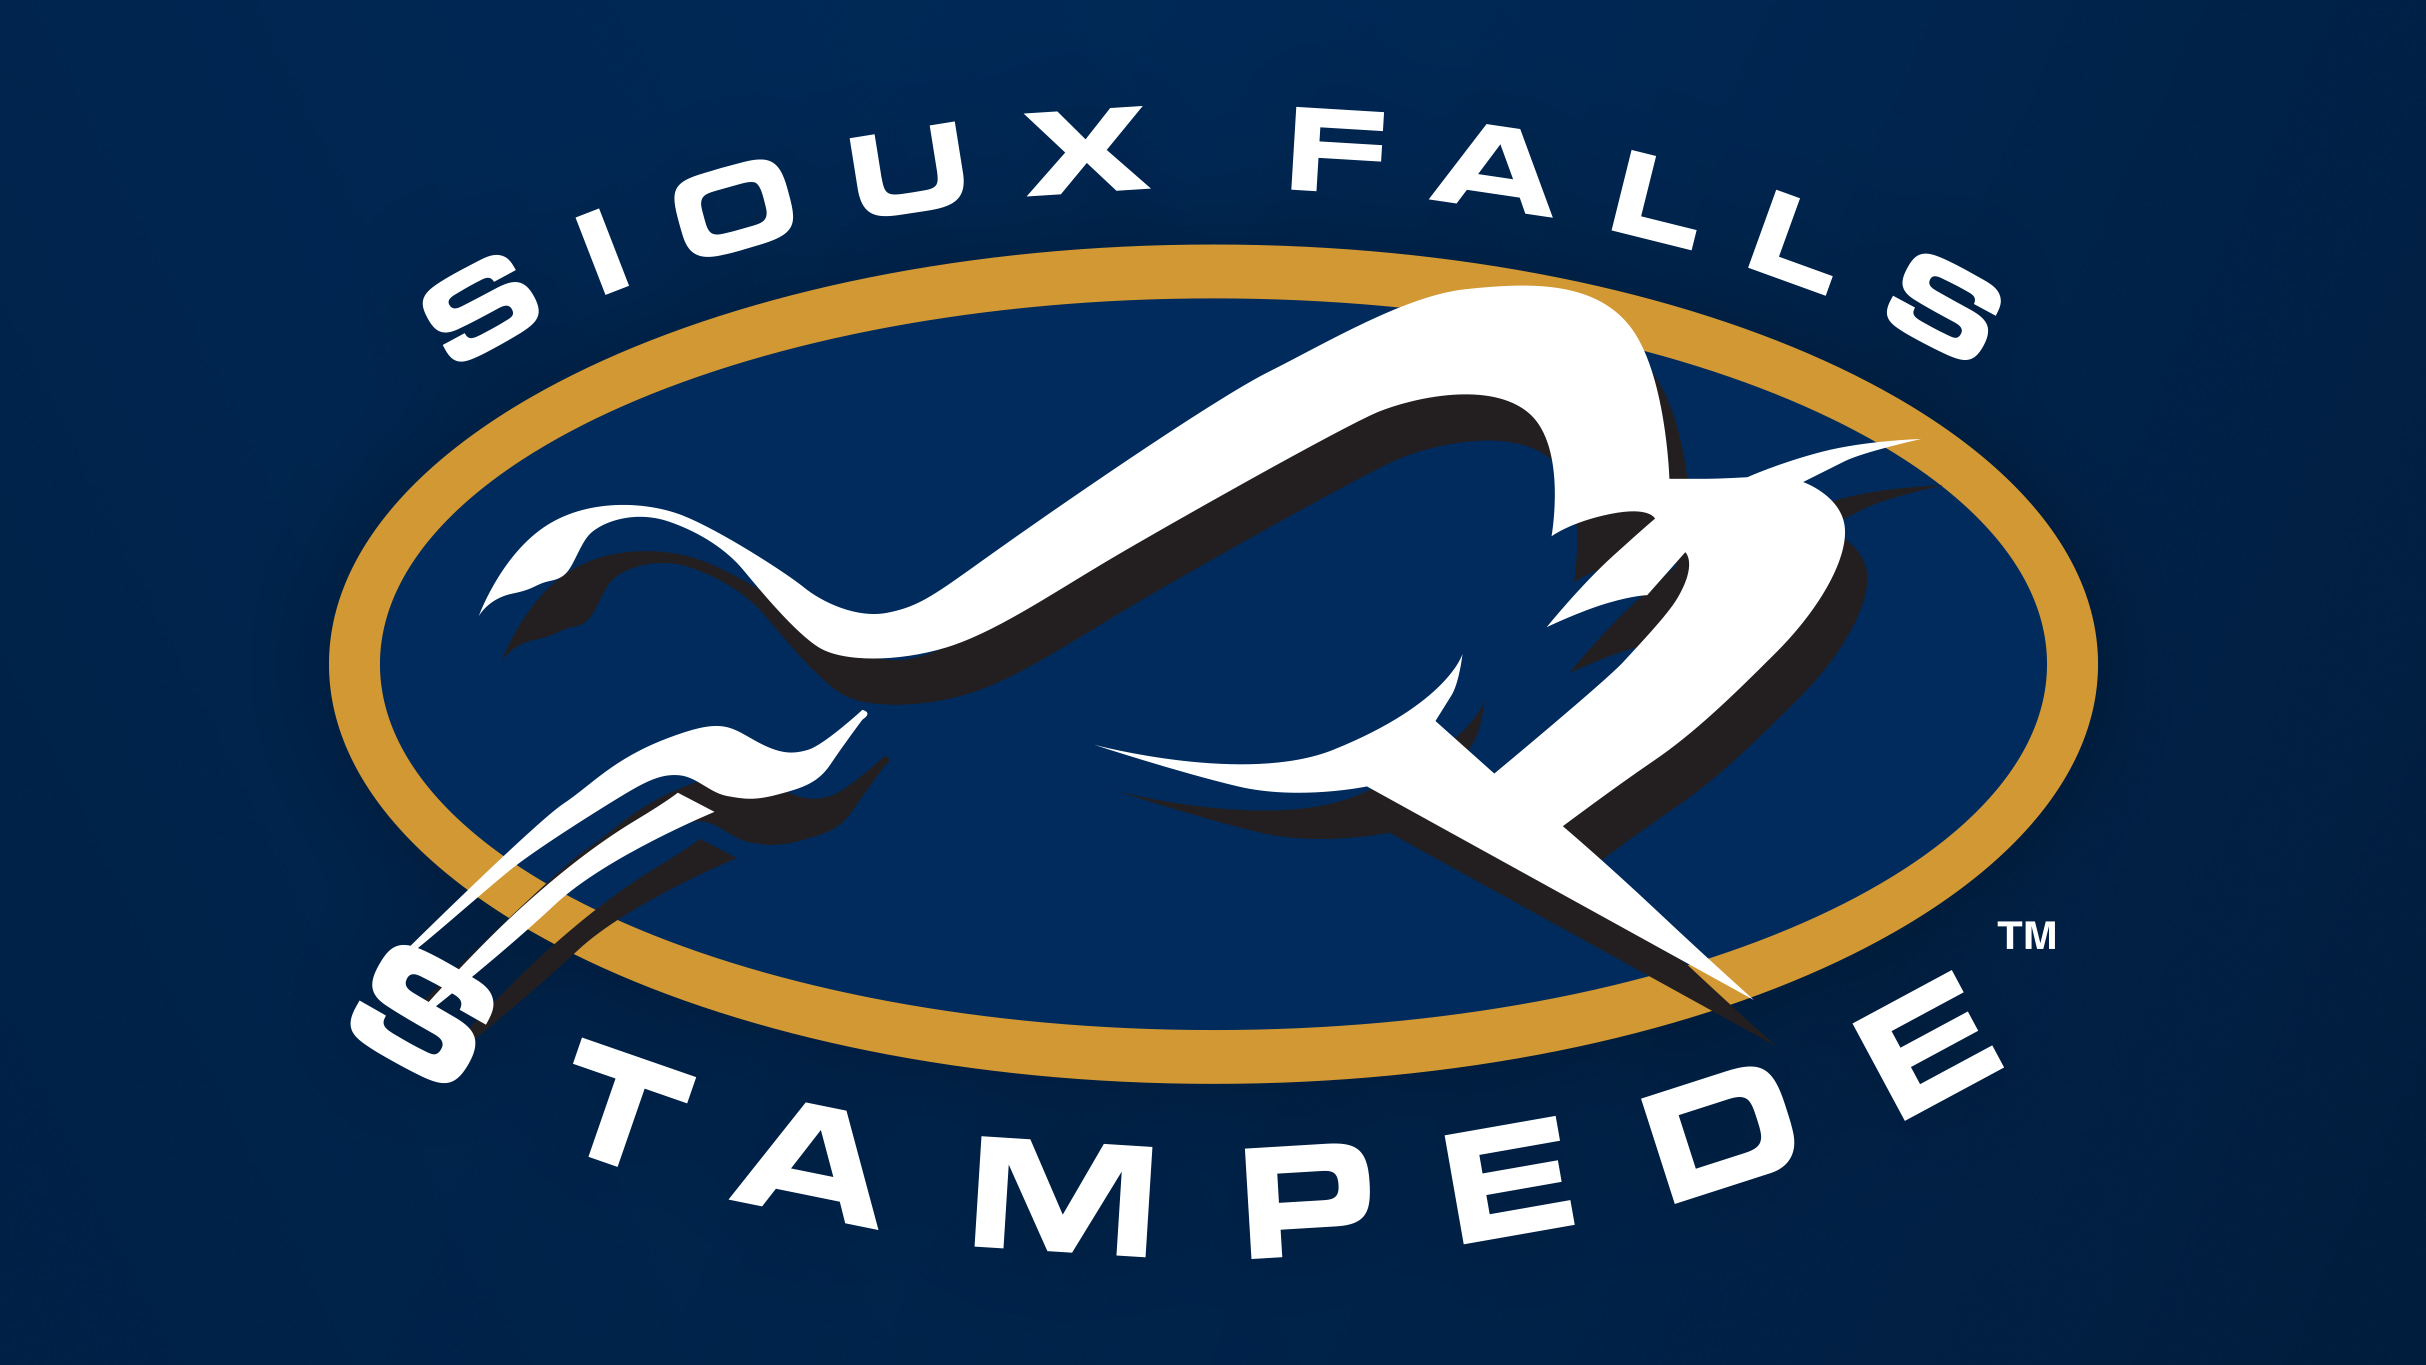 Sioux Falls Stampede at Denny Sanford PREMIER Center - Sioux Falls, SD 57104